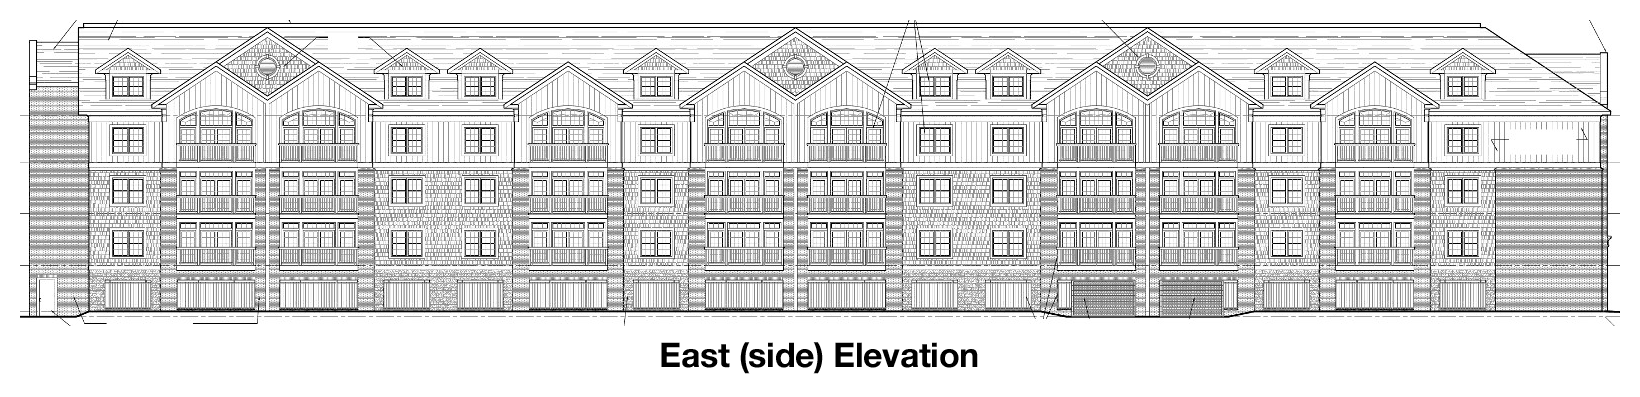 East (side) Elevation of proposed development at 759 Park Ave. [IMAGE: Provided by John Baker]